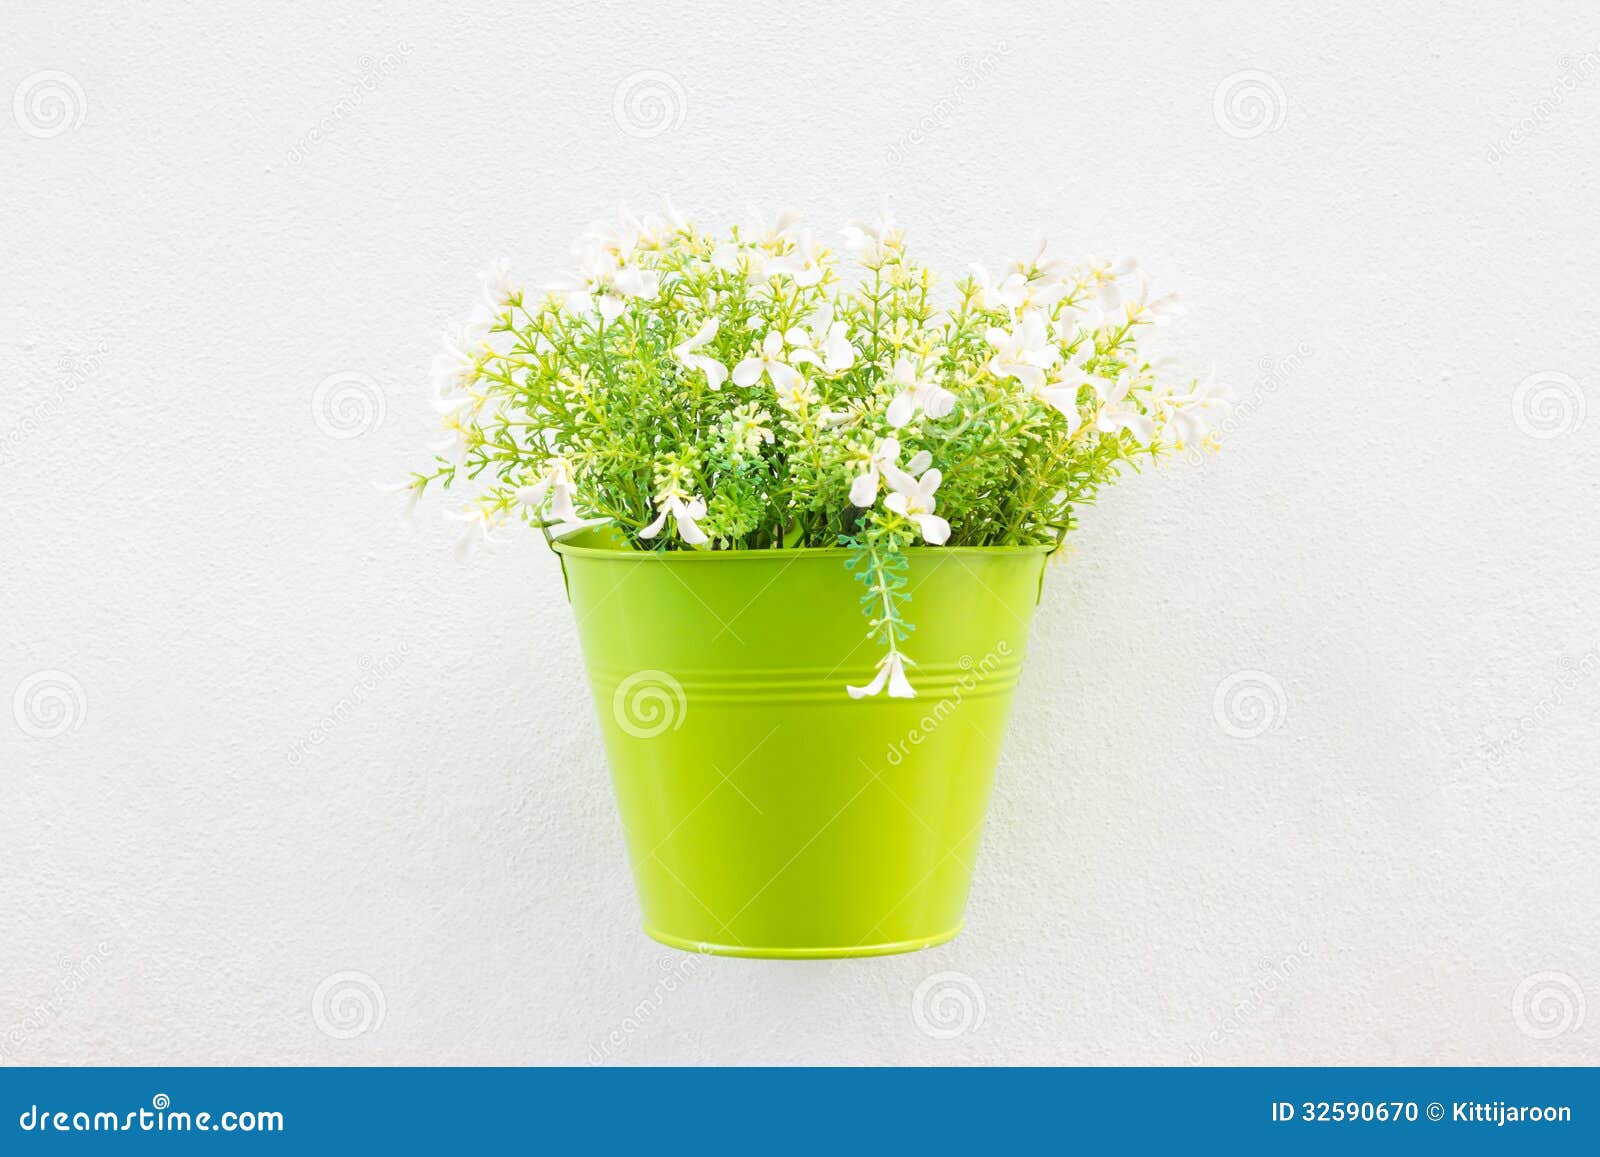 Green Jardiniere and Flower on Wall Stock Photo - Image of design ...